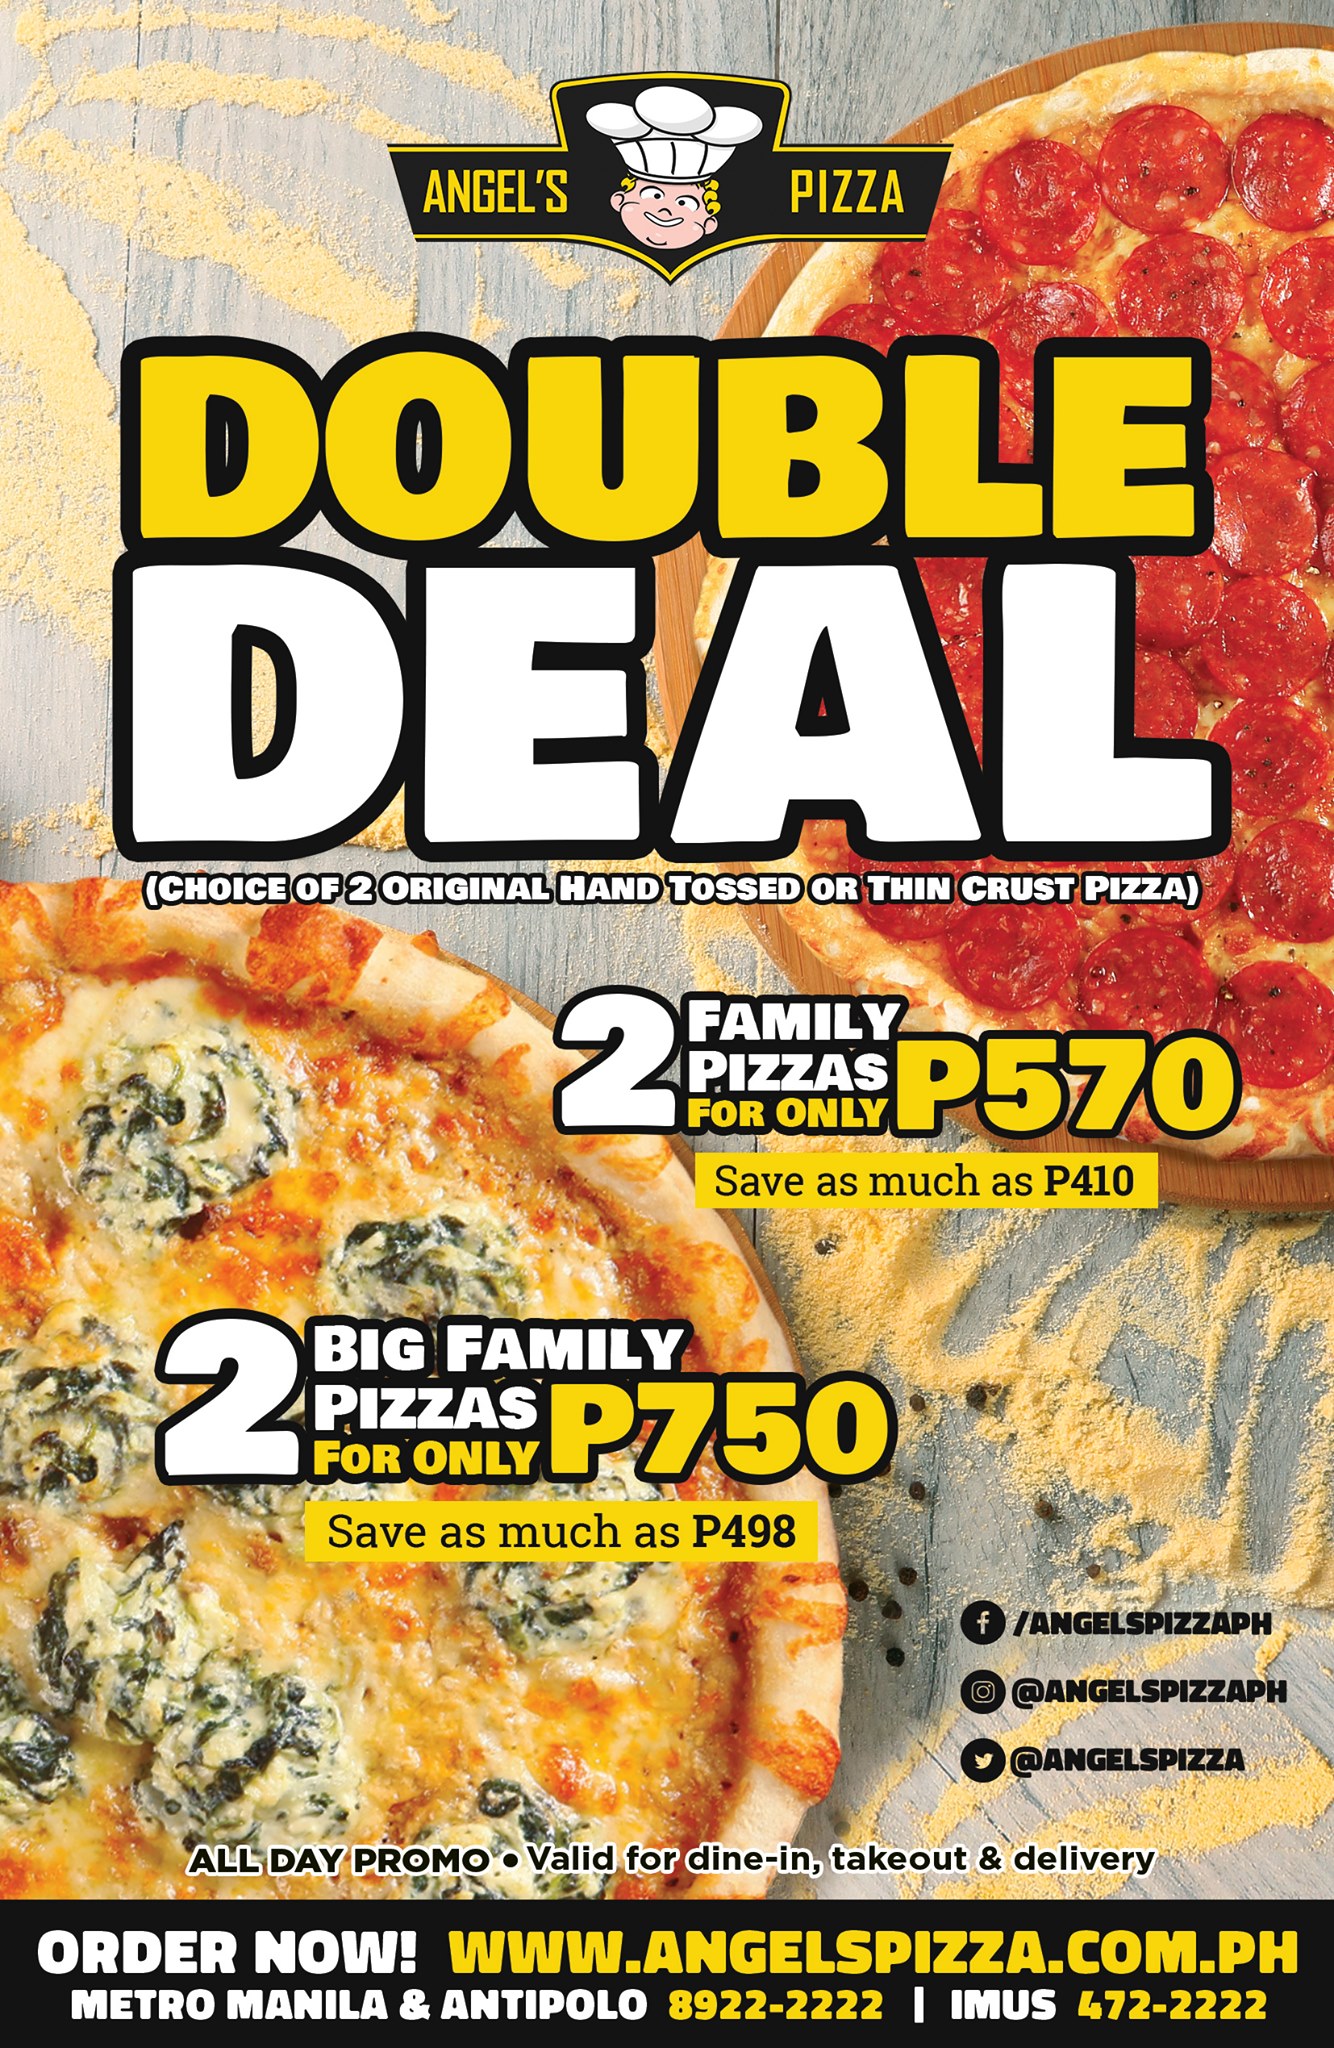 ANGEL'S PIZZA: Menu, Delivery, Promos, & More! - Peso Lab - Money Guide ...